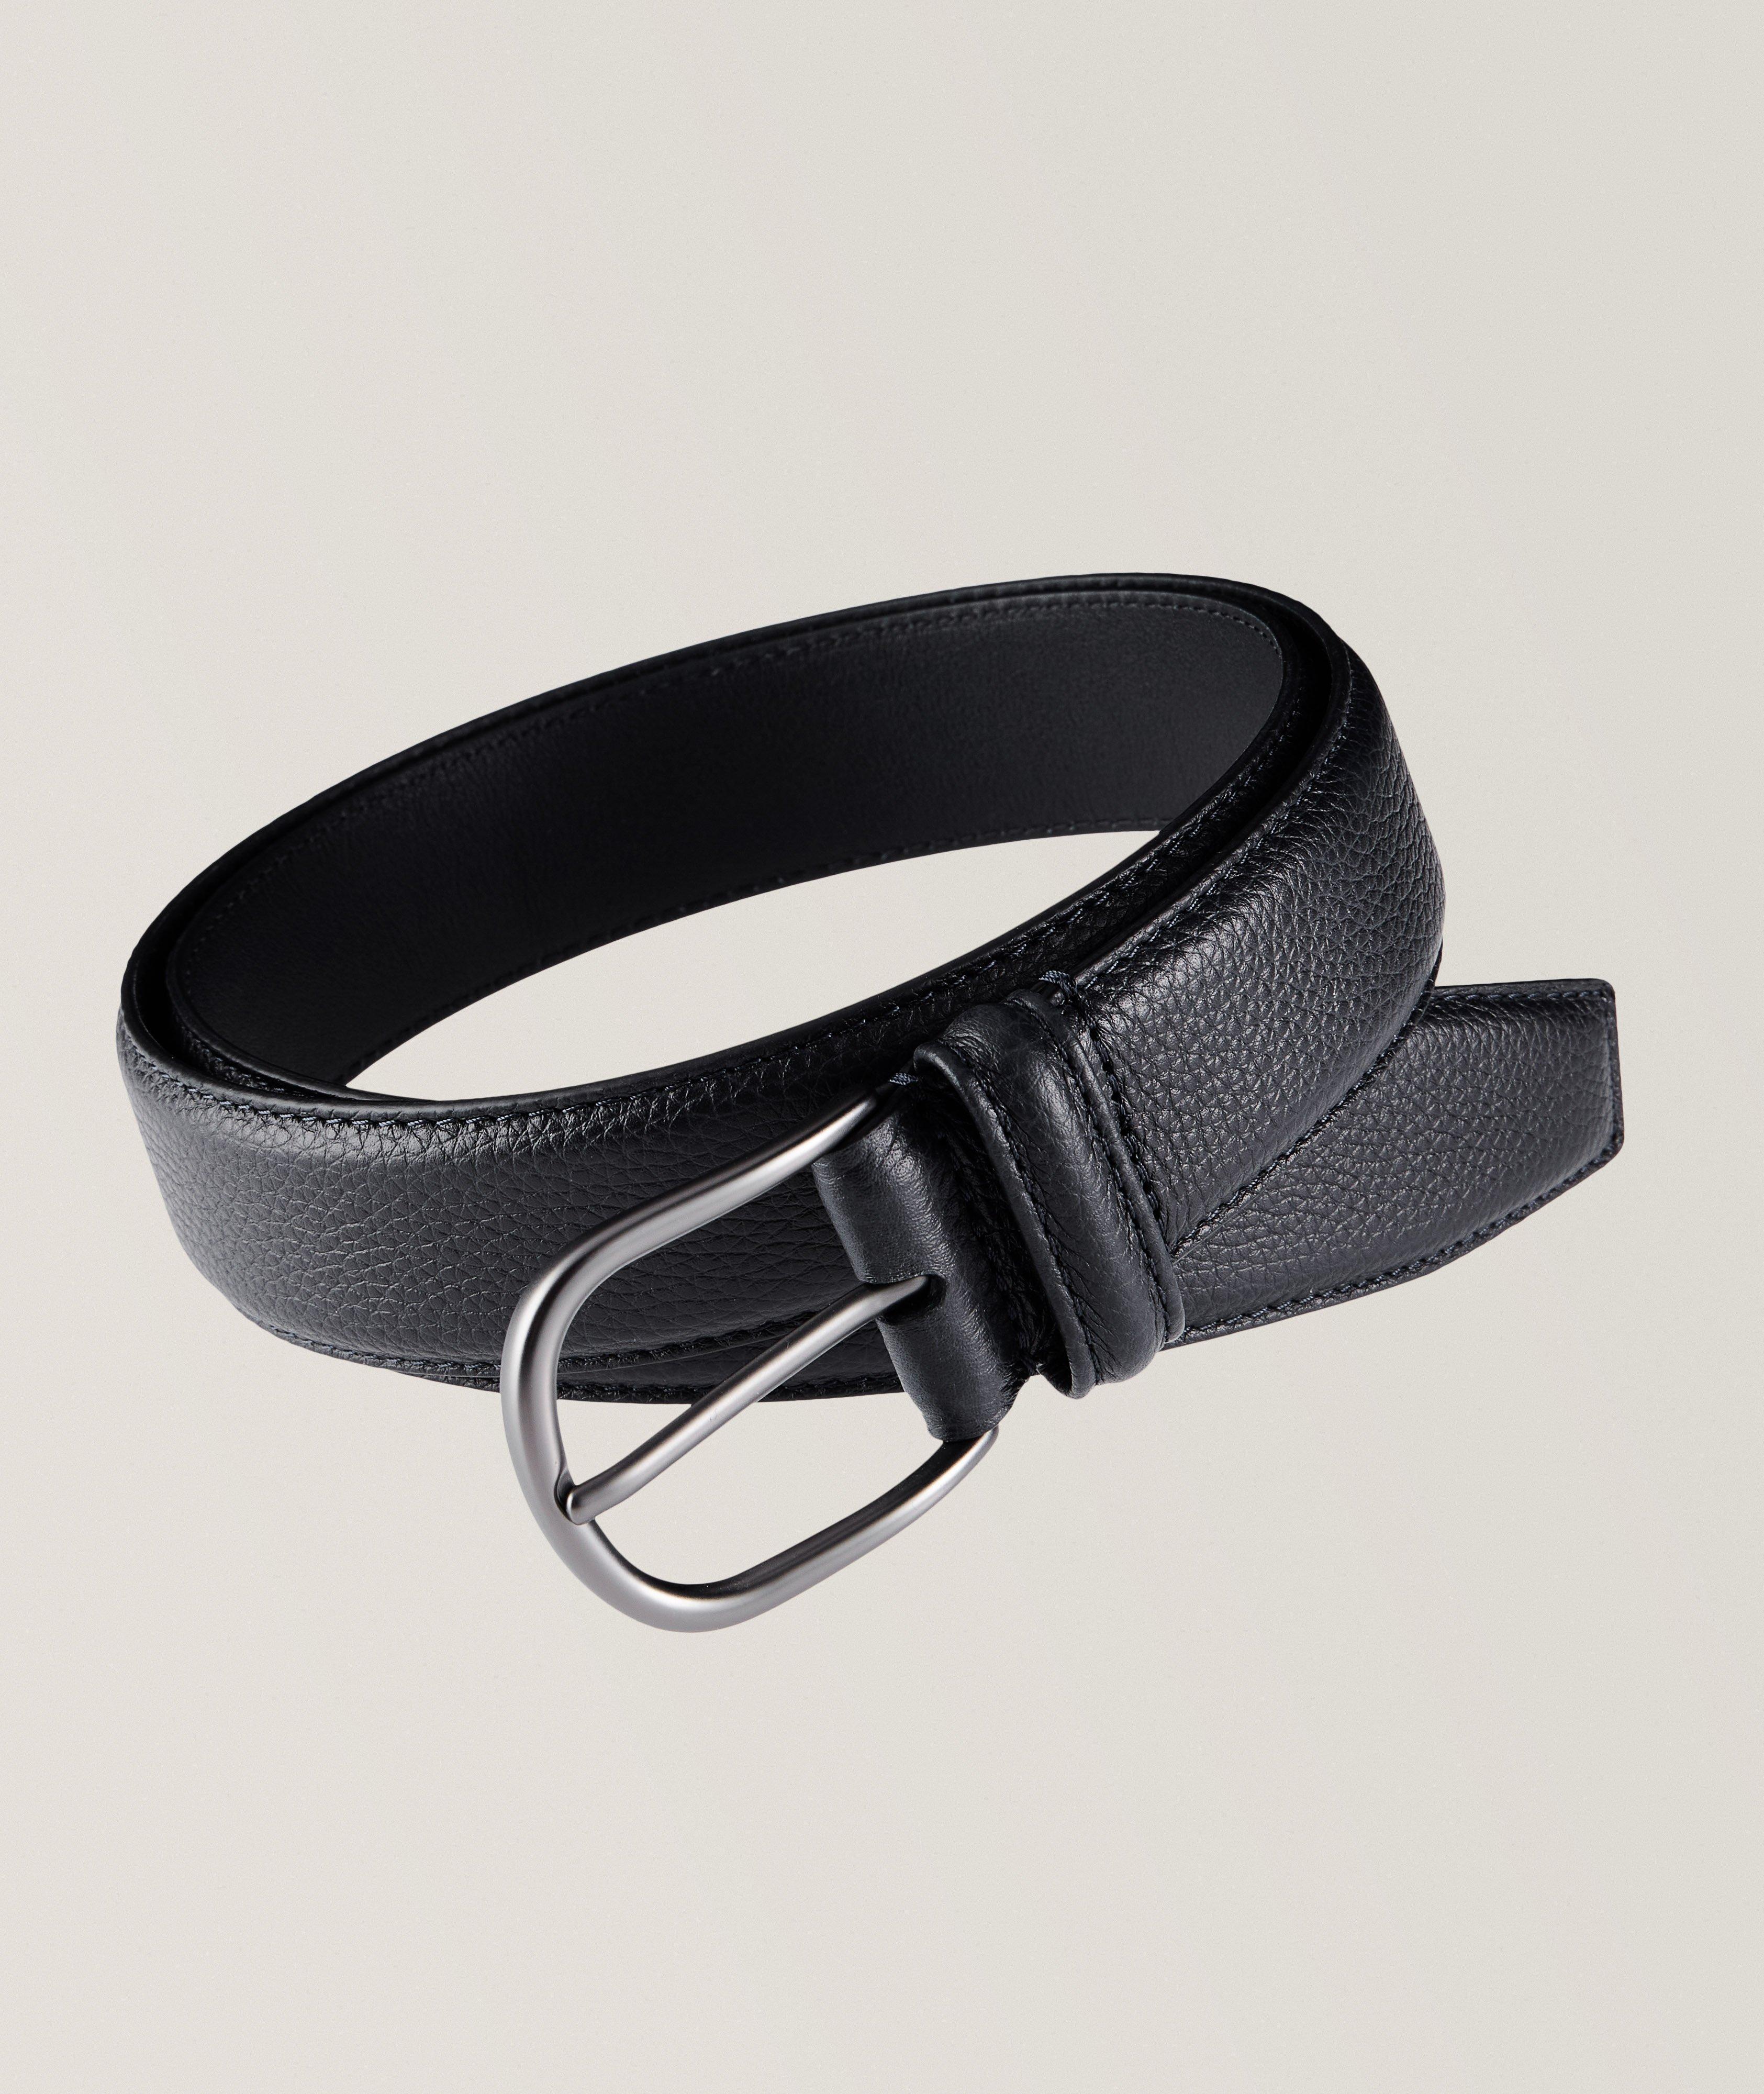 Anderson's Grained Leather Business Belt, Belts